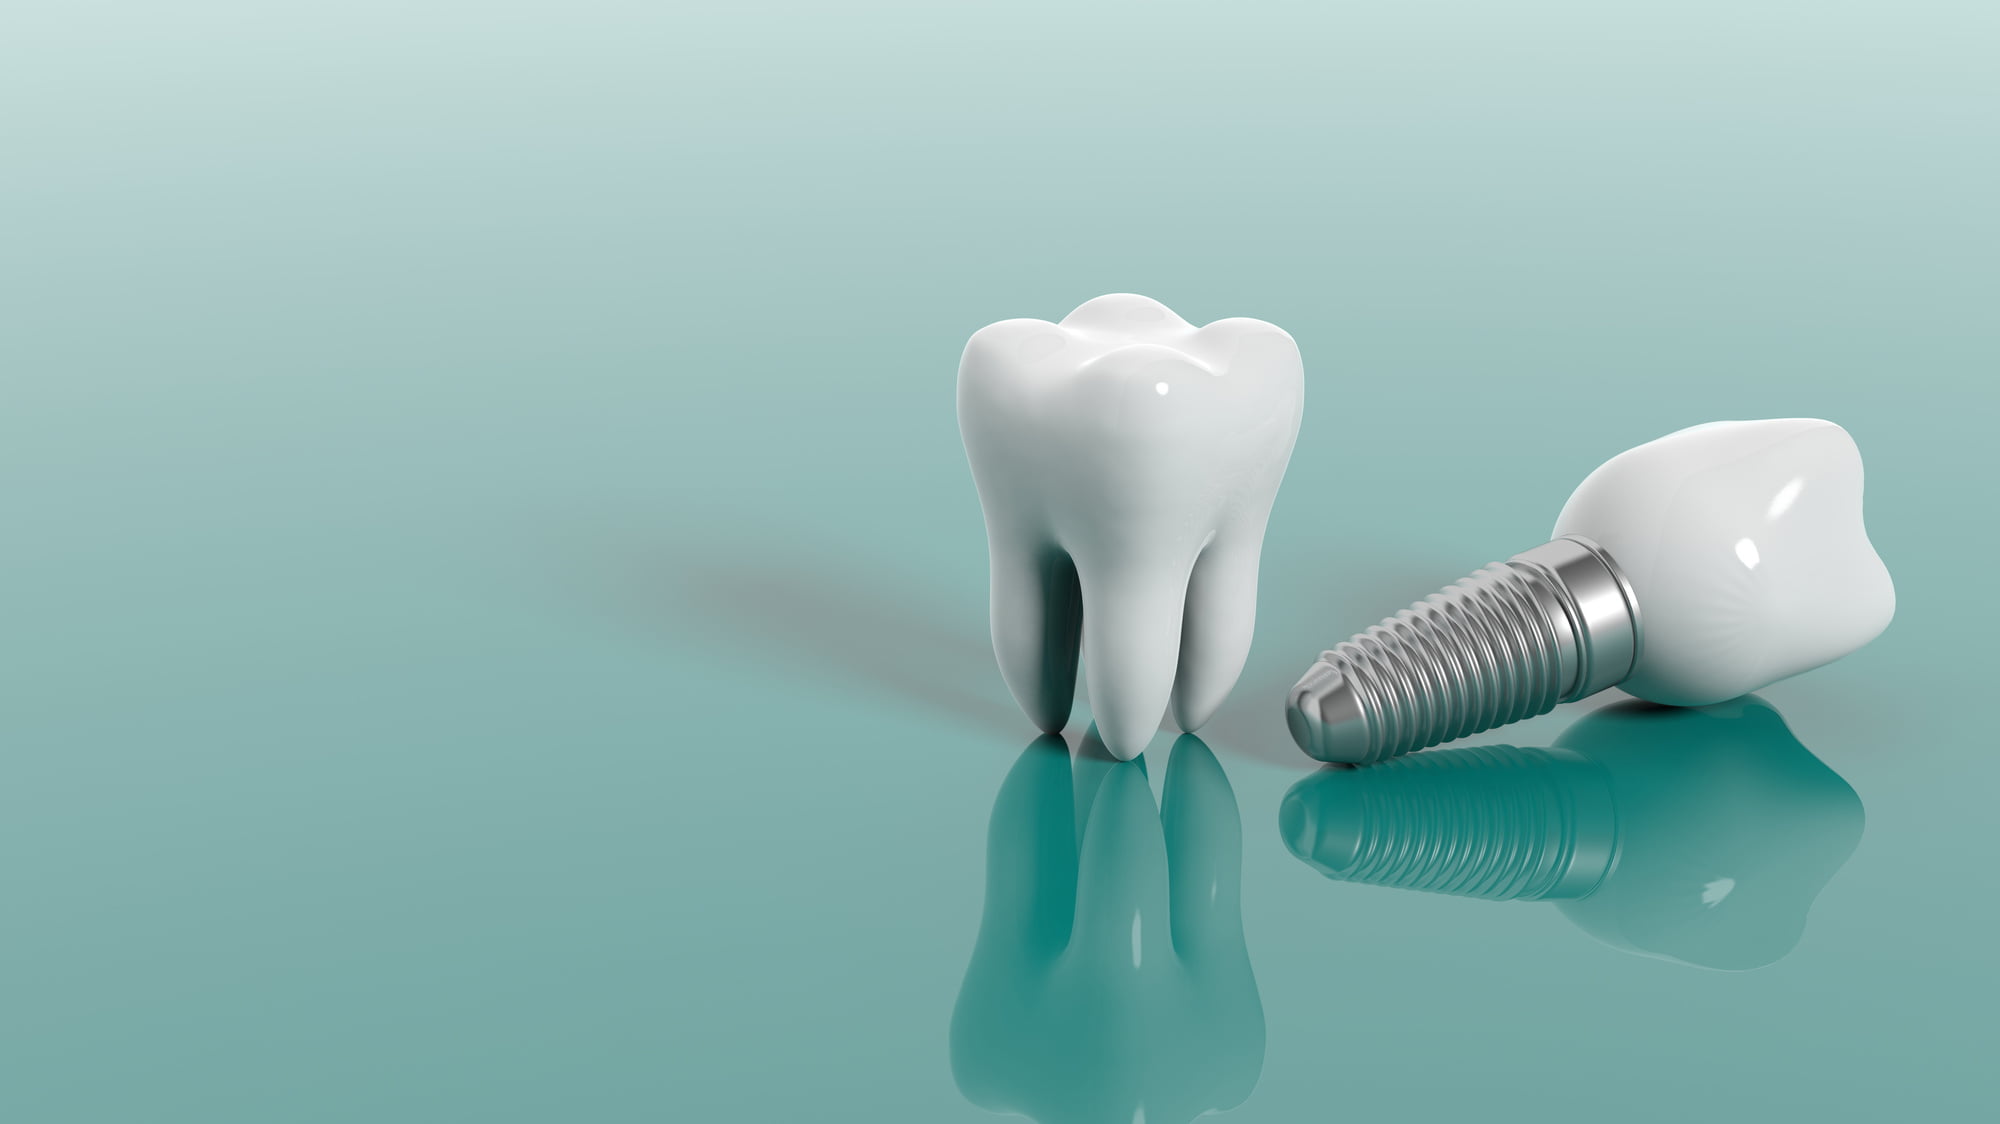 There are several reasons why people get dental implants, but how much do dental implants cost? These are the prices you can expect.